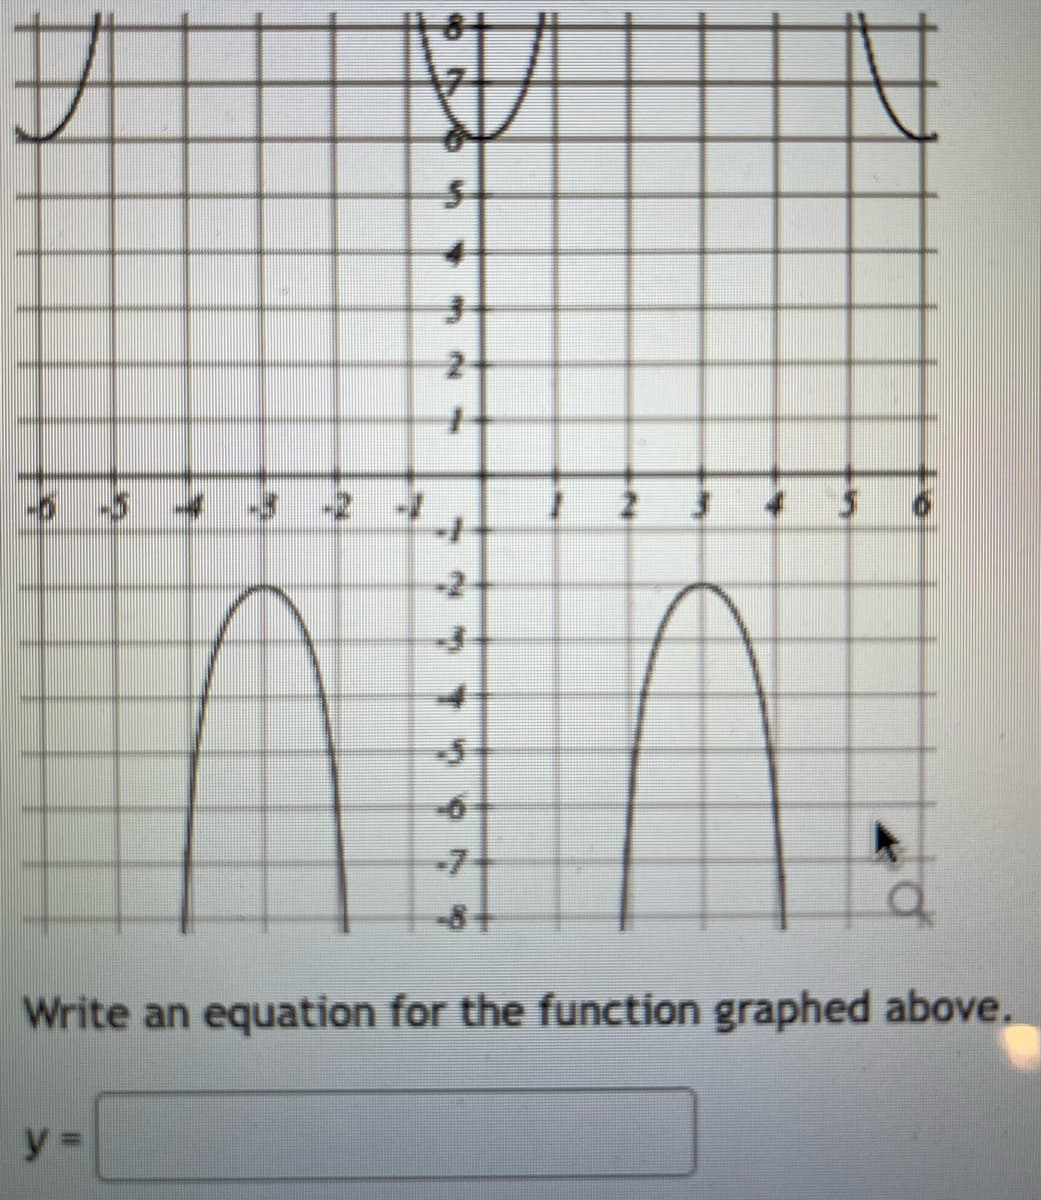 -7-
Write an equation for the function graphed above.
y
